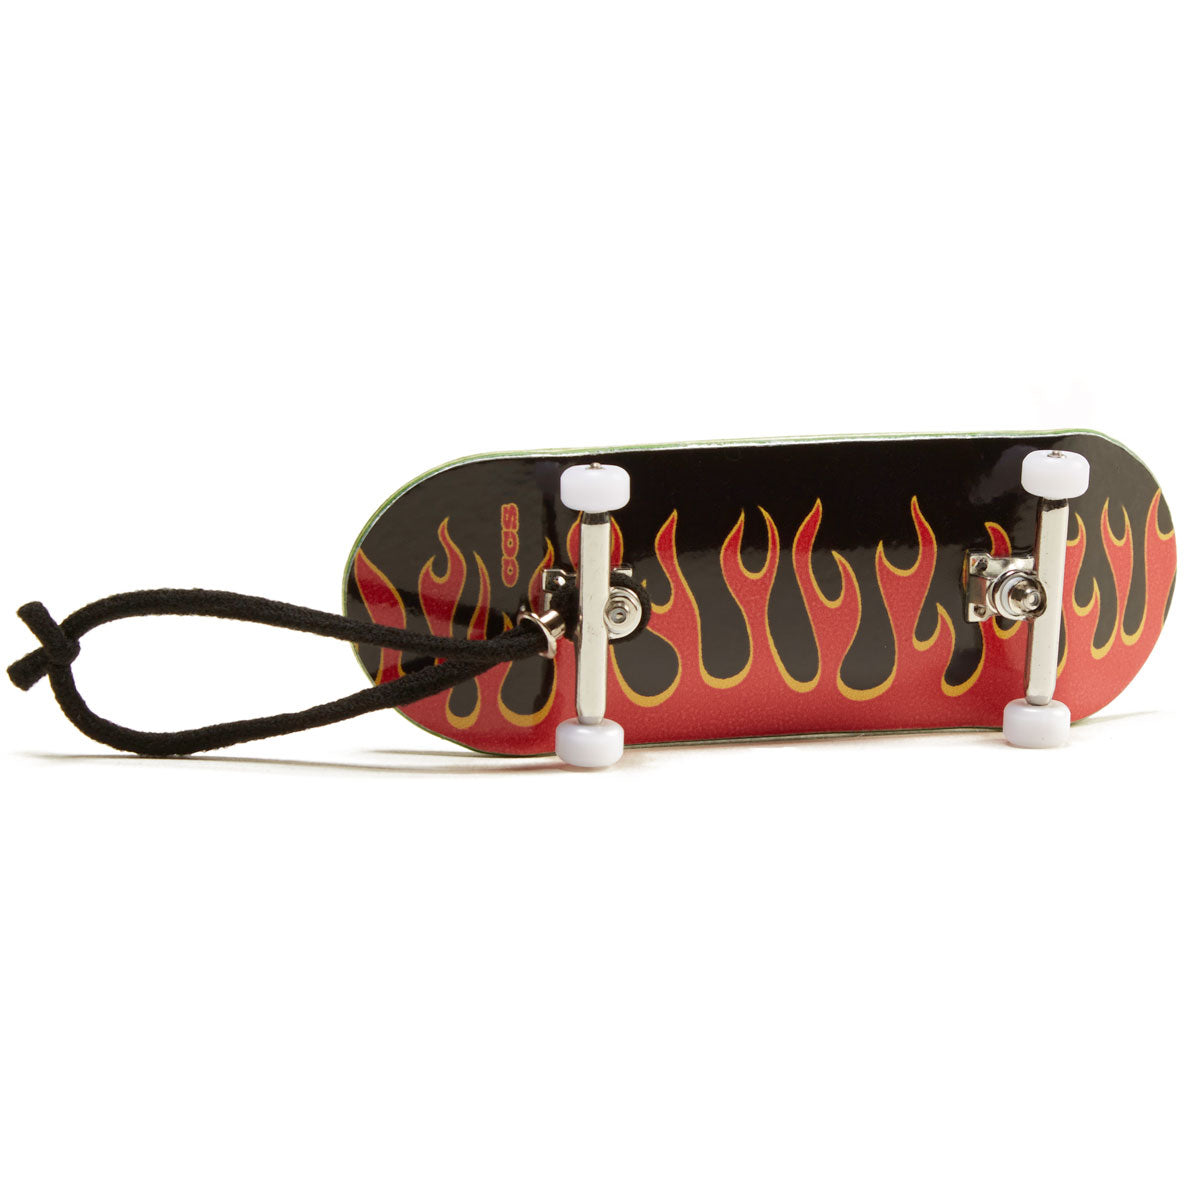 CCS Fingerboard - Flames Red image 2